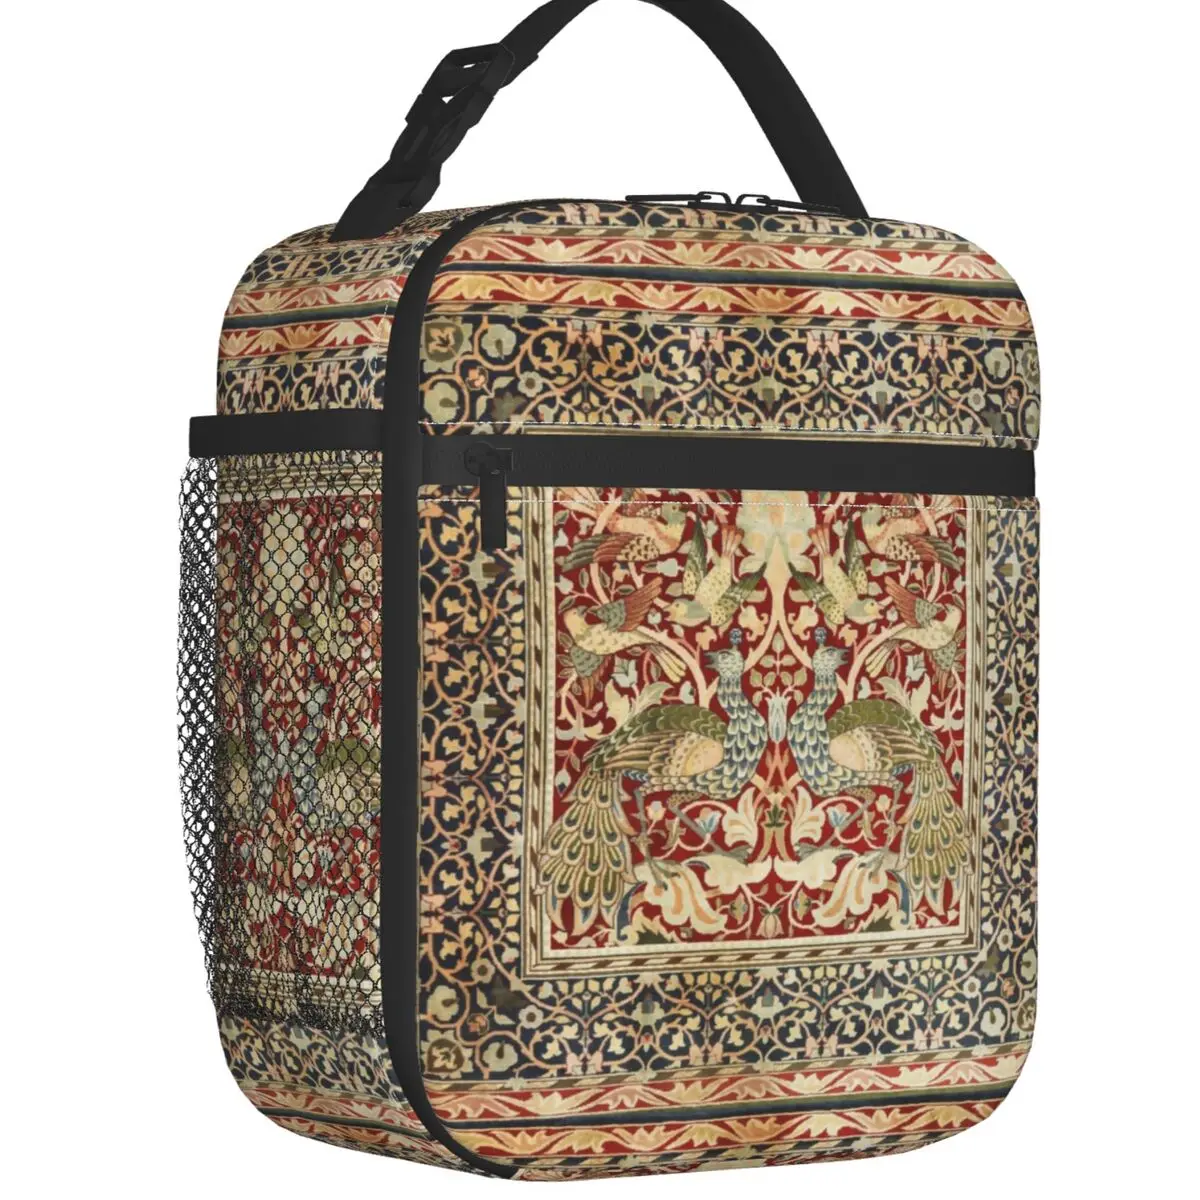 William Morris Vintage Thermal Insulated Lunch Bags Floral Textile Pattern Portable Lunch Container Camp Travel Storage Food Box